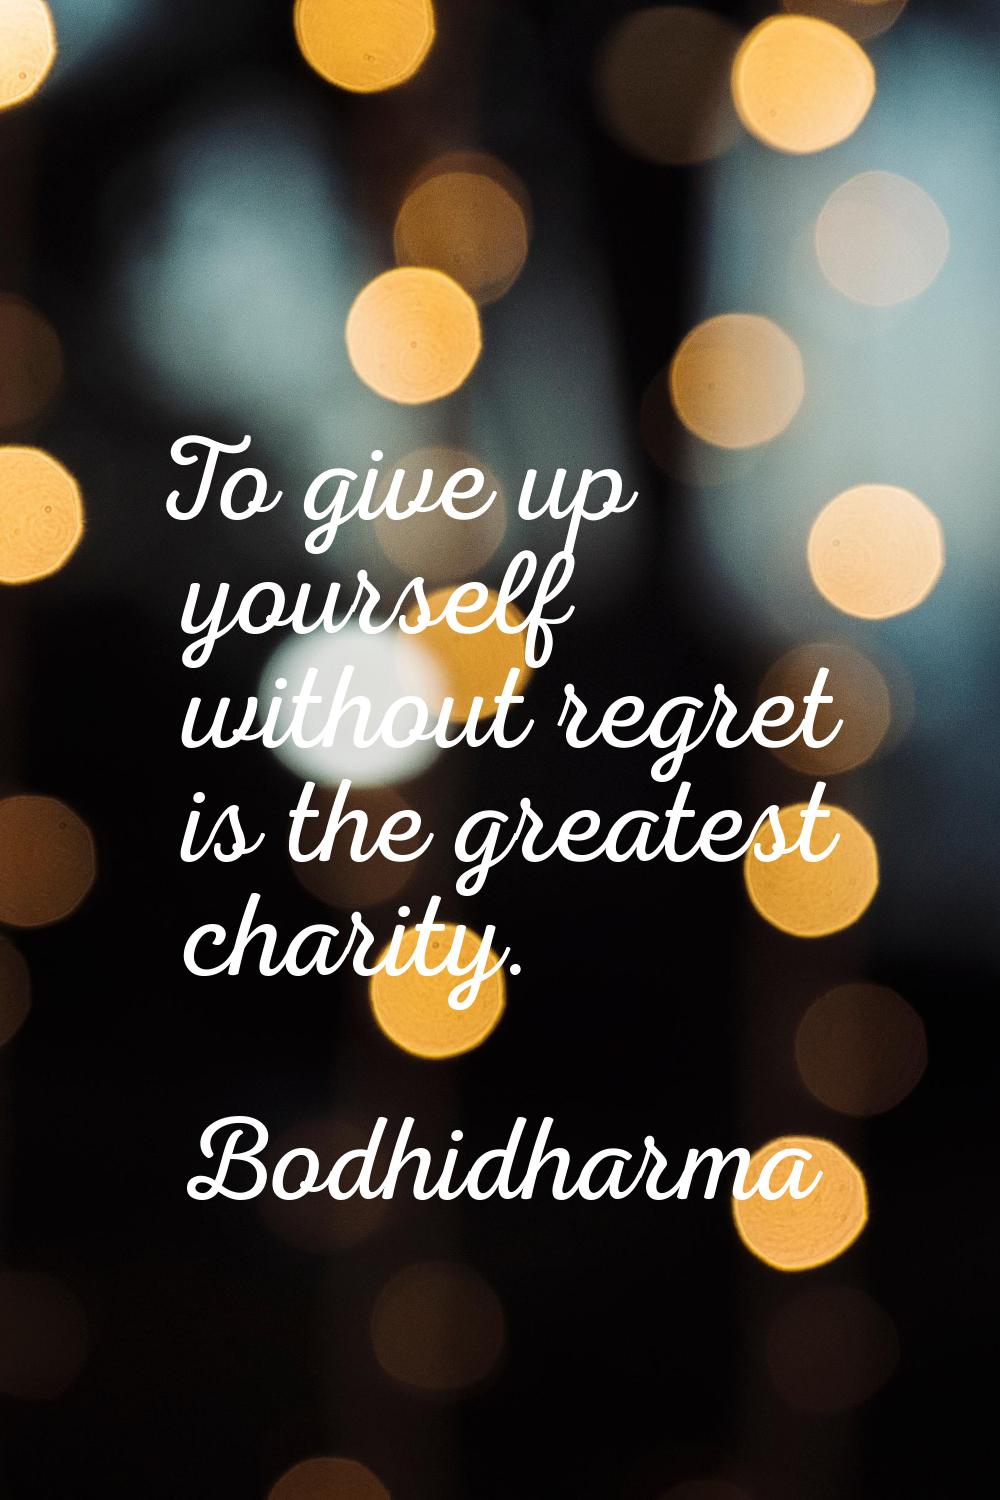 To give up yourself without regret is the greatest charity.